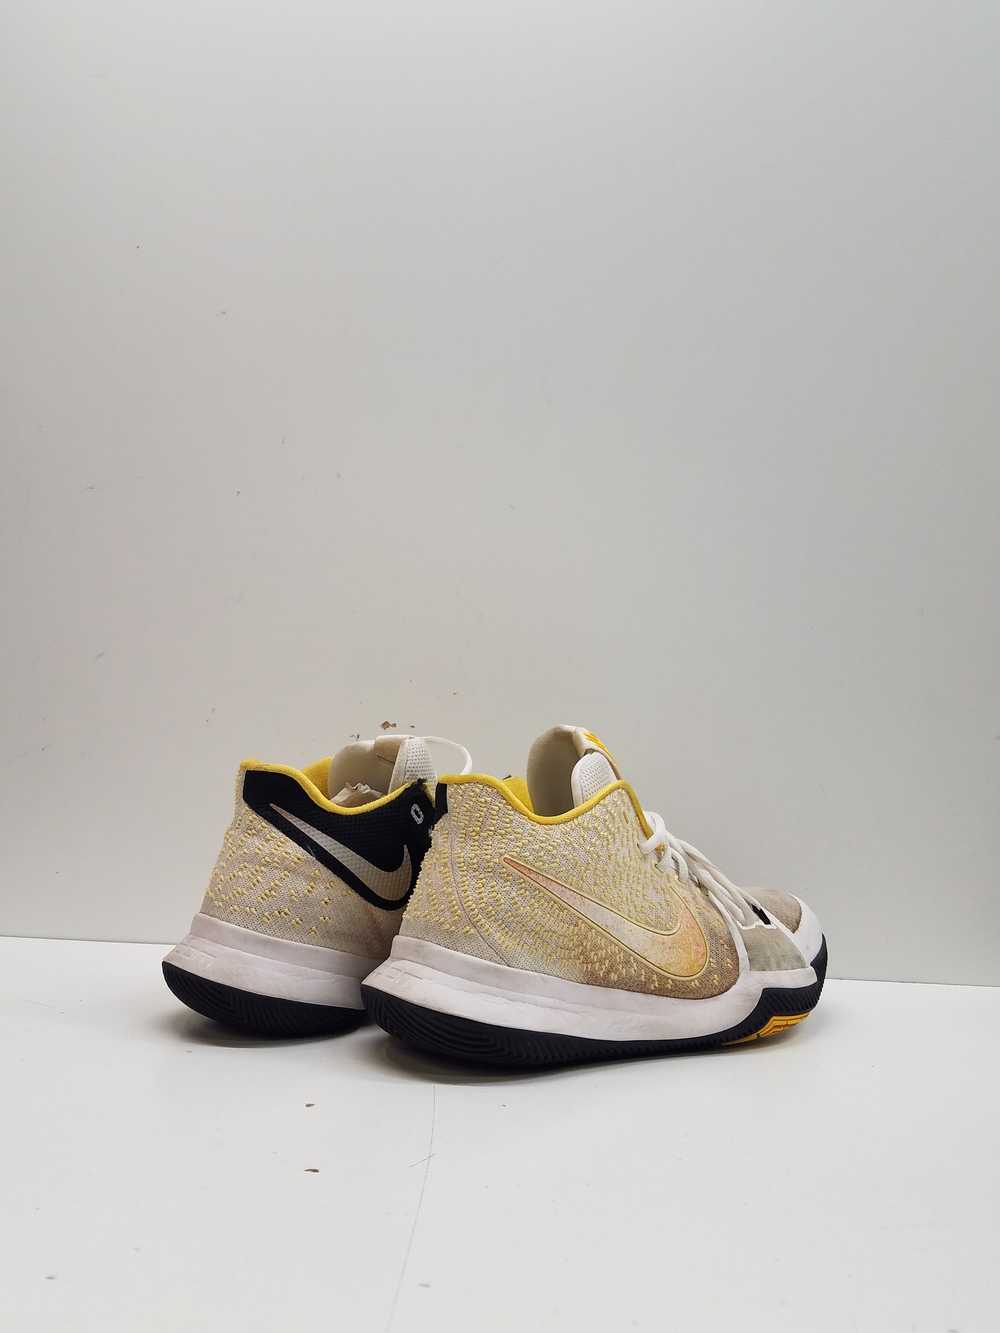 Nike Kyrie Basketball Shoes Men's - image 4